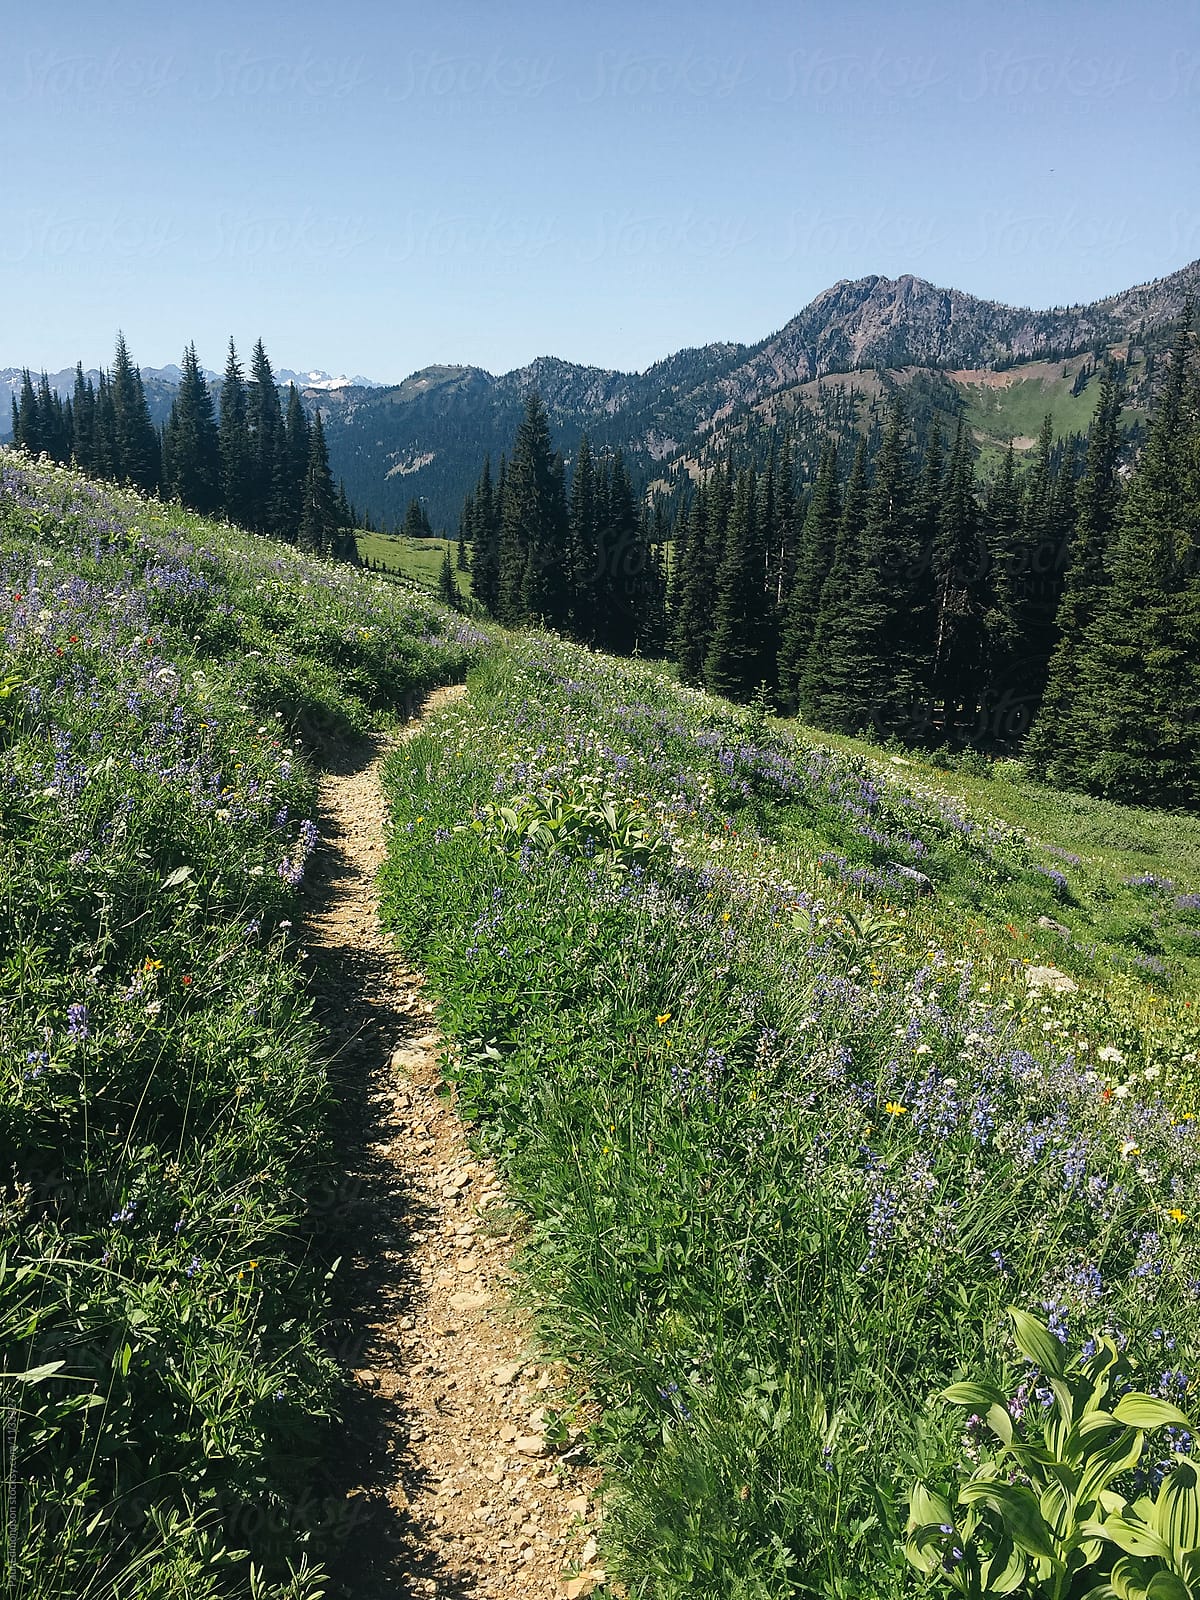 Hiking trail through wildflower meadow and mountains, North Cascades, WA